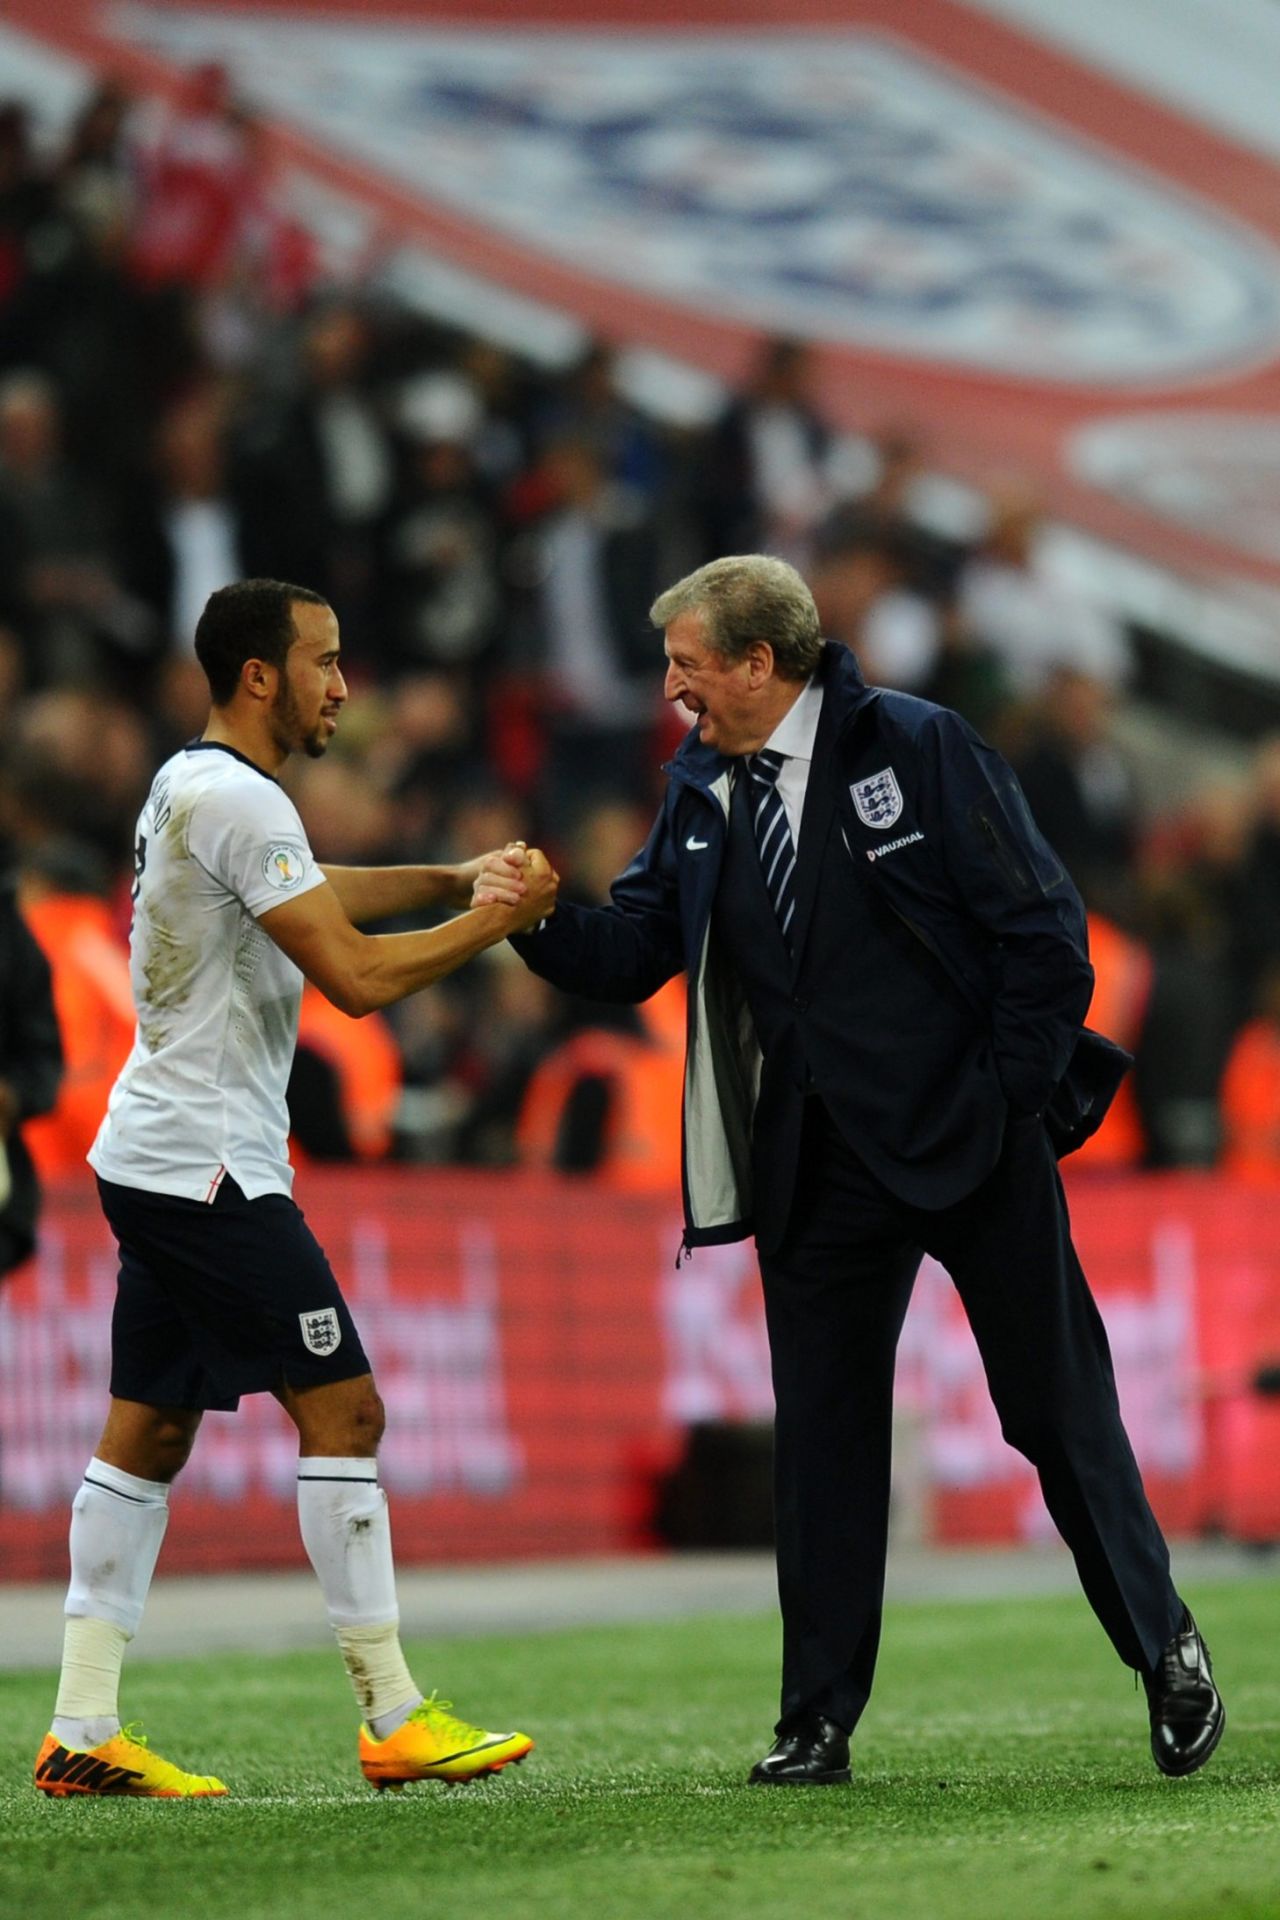 English football has spent decades battling the scourge of racism. England manager Roy Hodgson (right) apologized after referring to Andros Townsend (left) as "the monkey" while telling an old NASA joke during a halftime team talk last year. In defense of his manager, Townsend tweeted: "I don't know what all this fuss is about....No offense was meant and none was taken! It's not even news worthy."